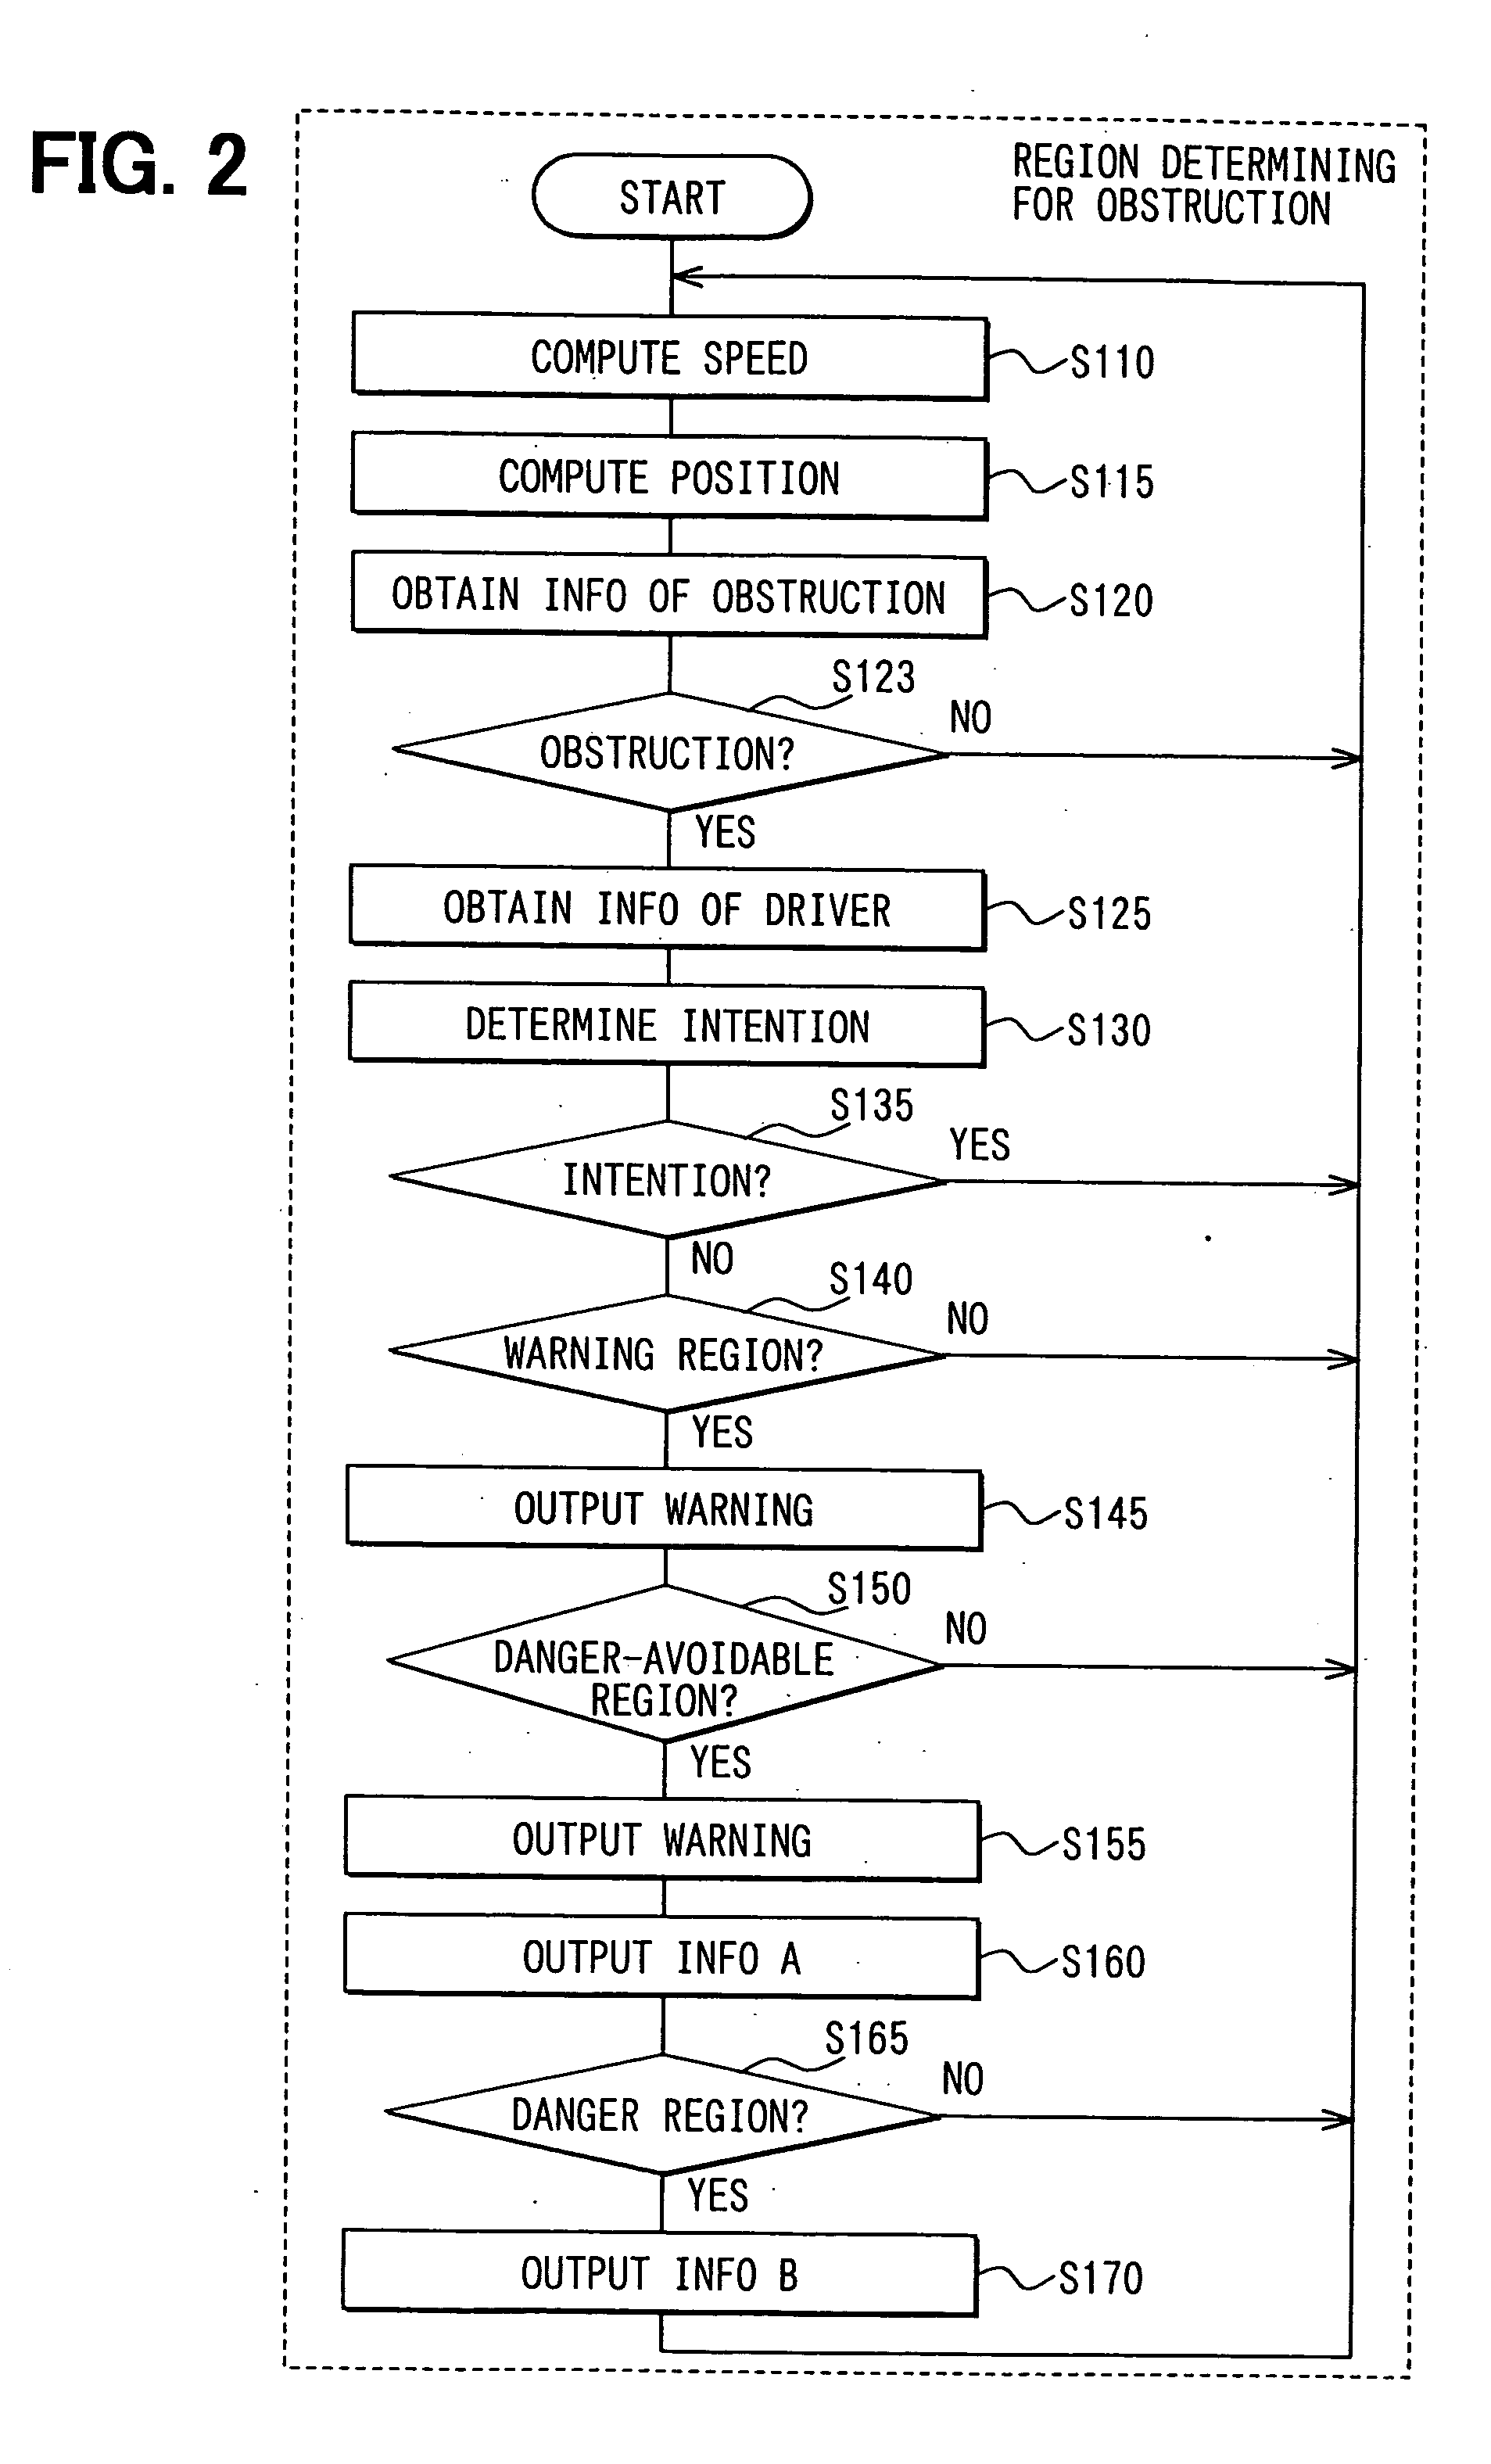 Driving state determining system